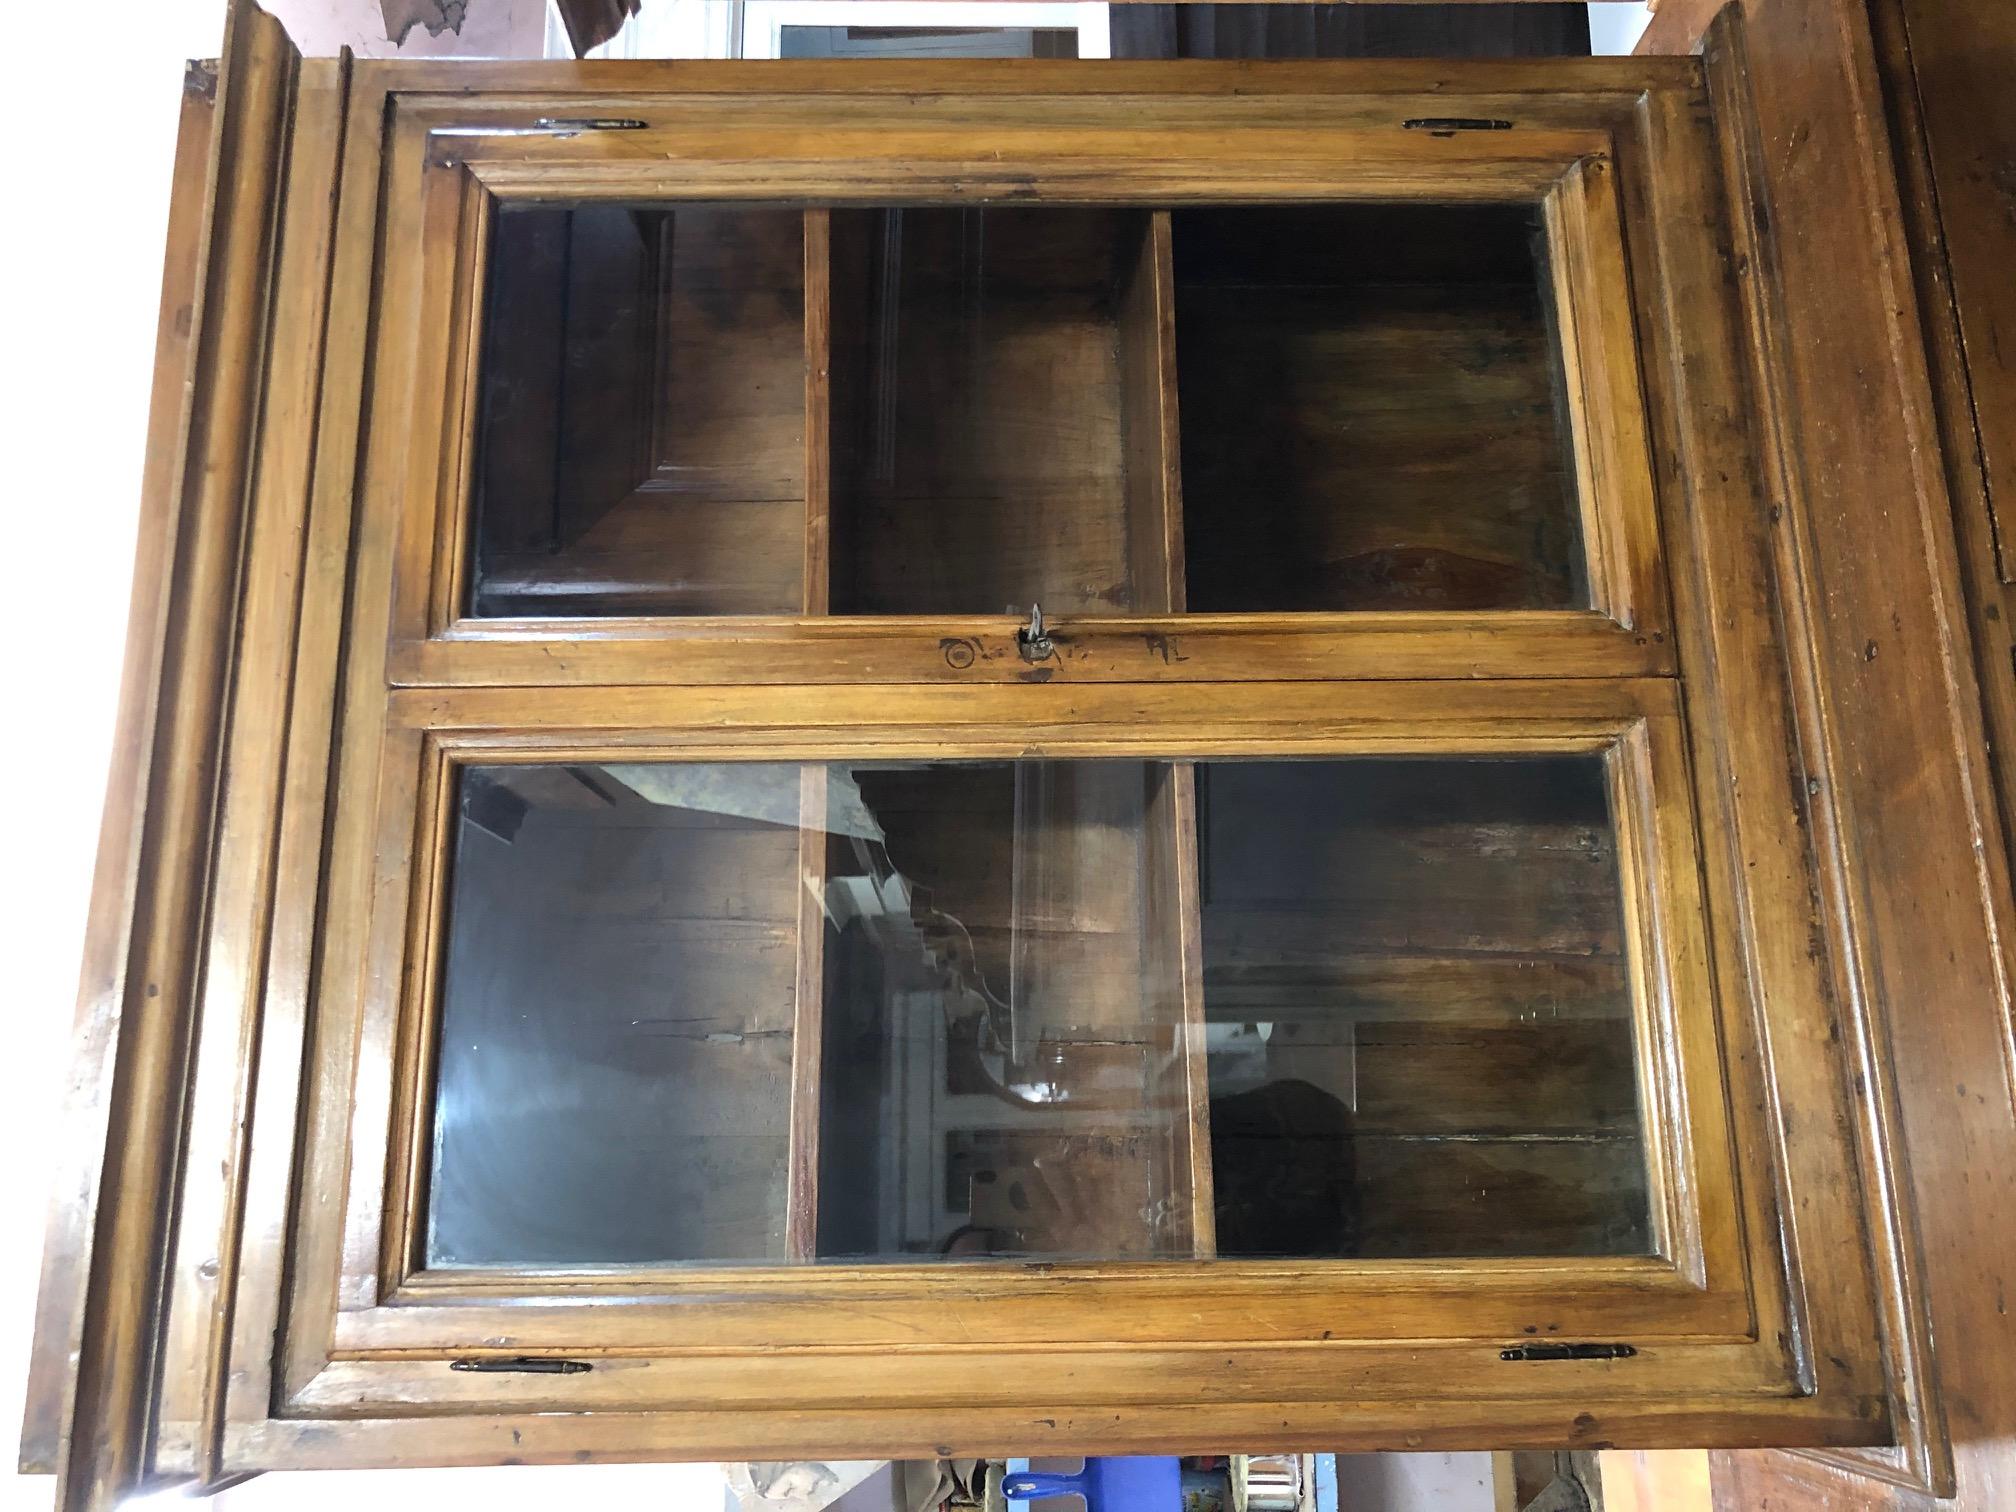 Early 20th Century Antique Tuscan Fir Showcase, Restored, Wax Polished 2